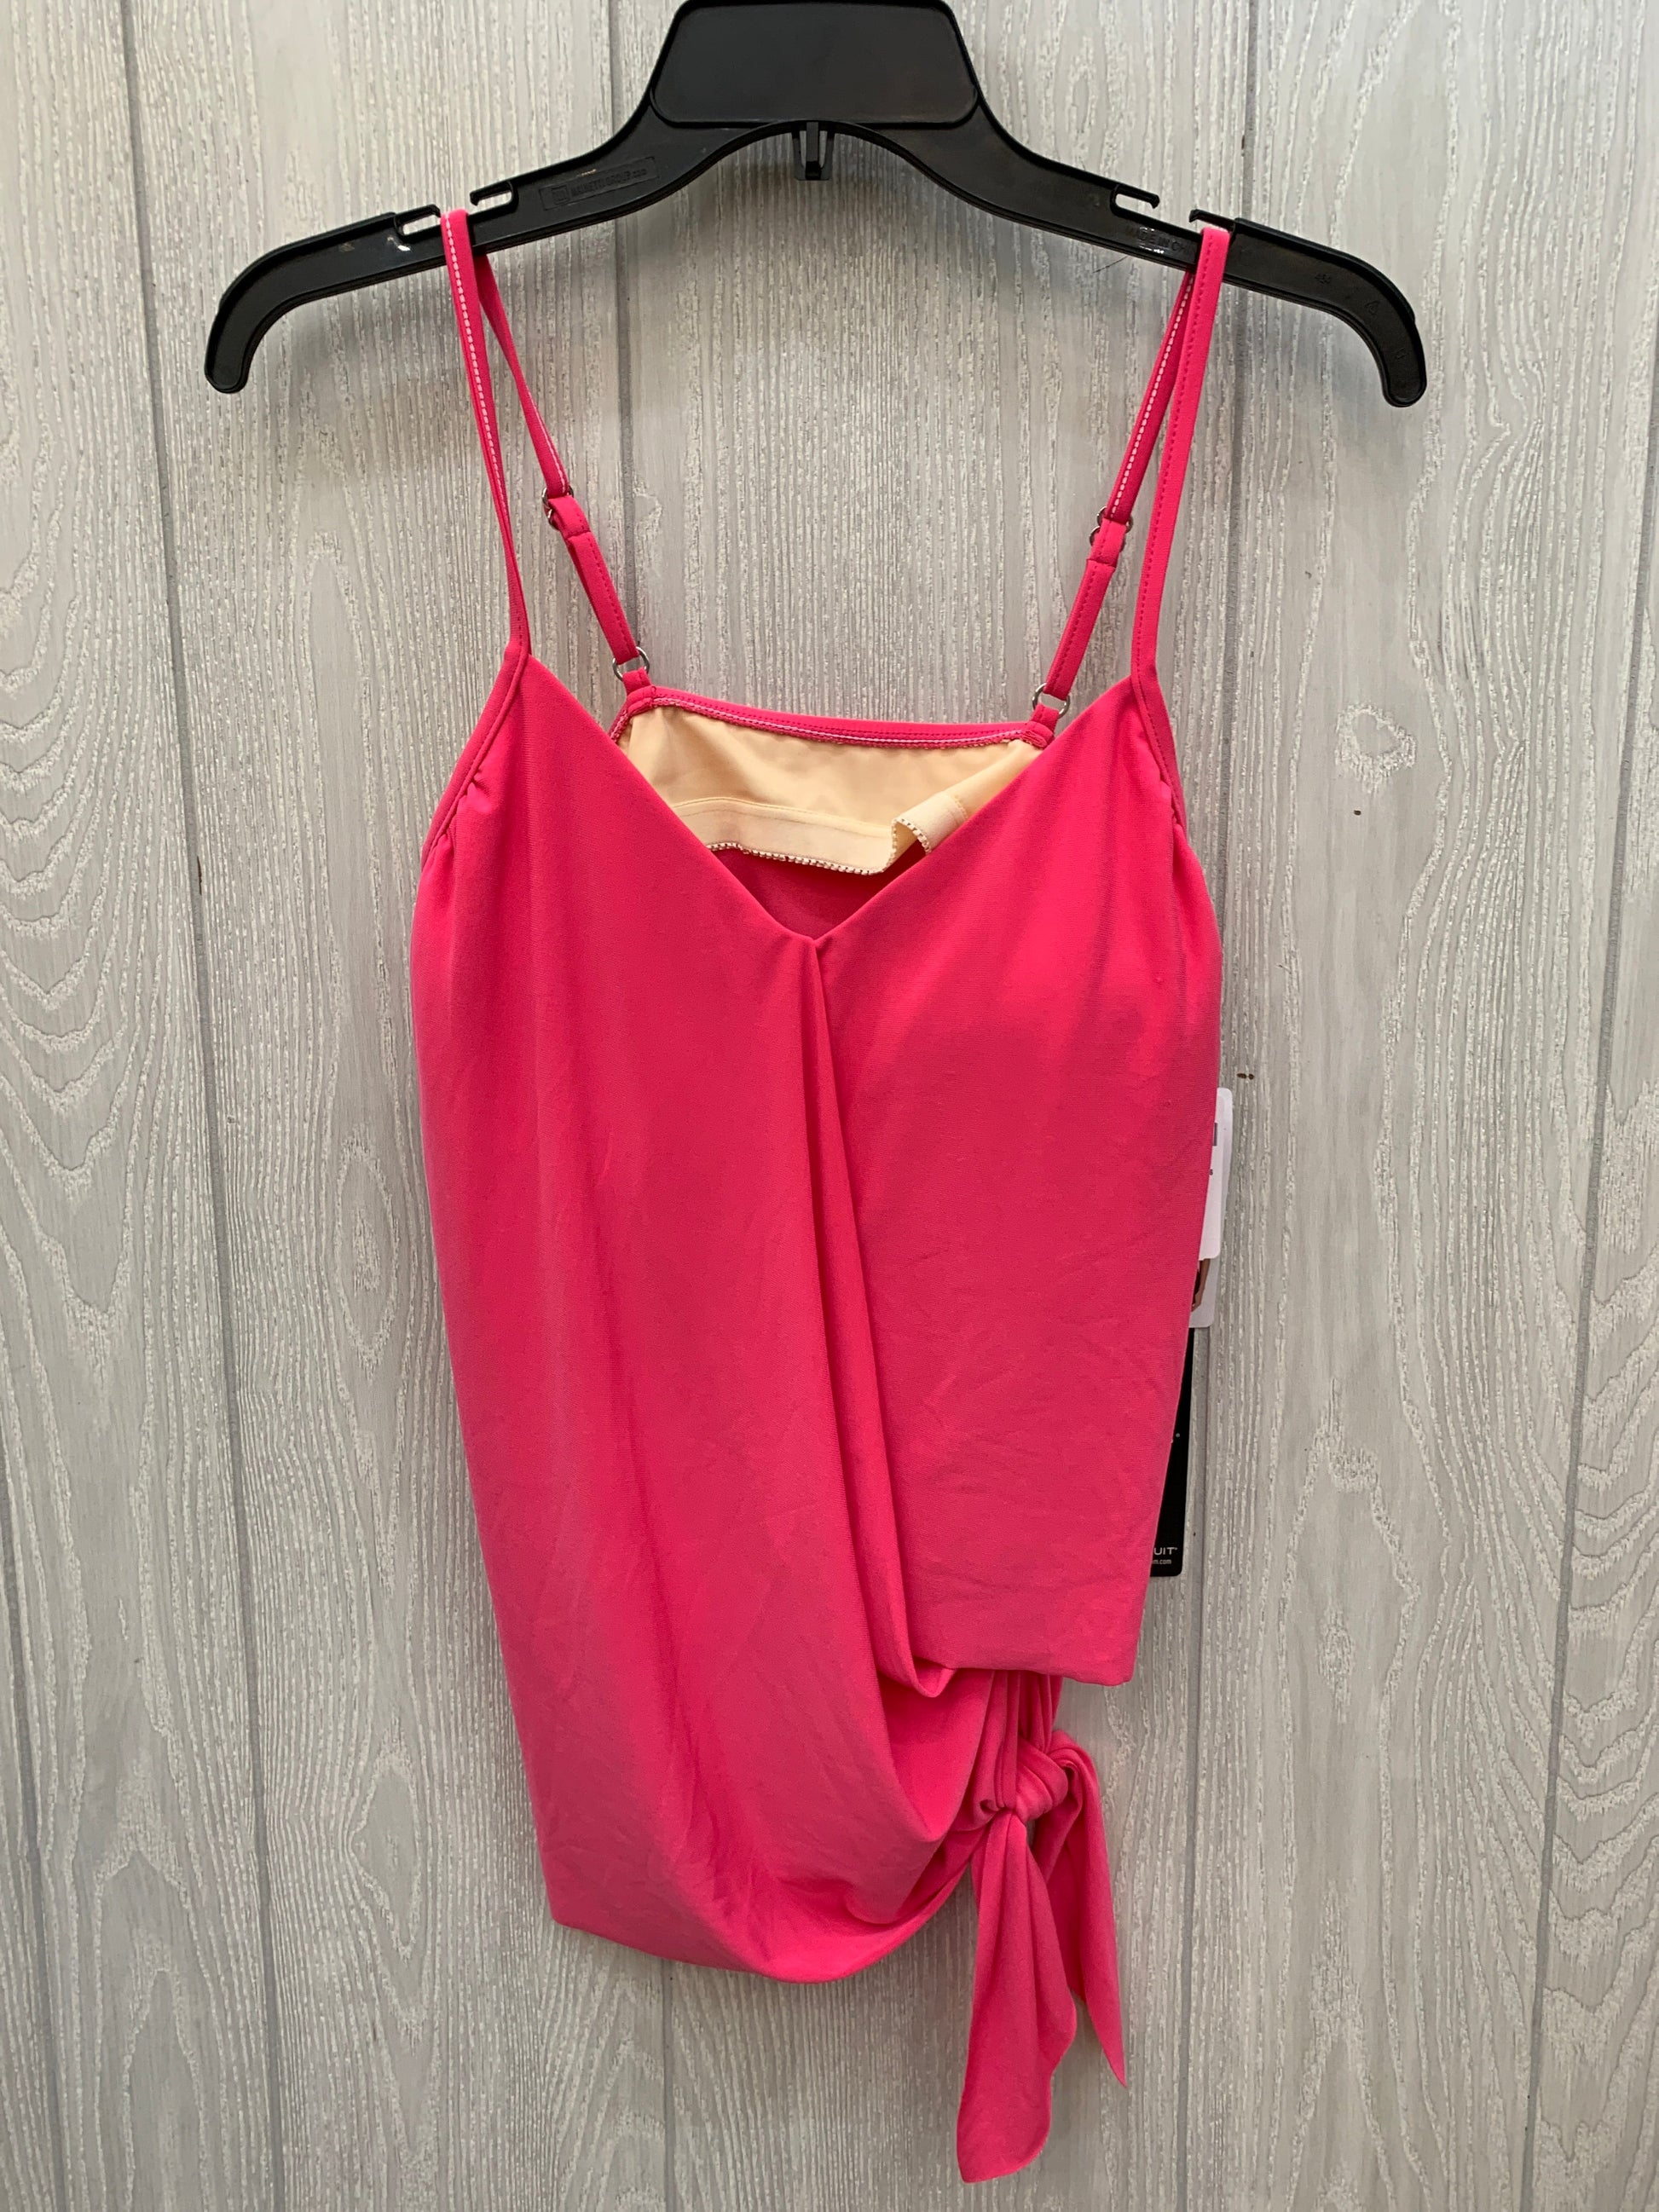 Swimsuit Top By Soma Size: 8